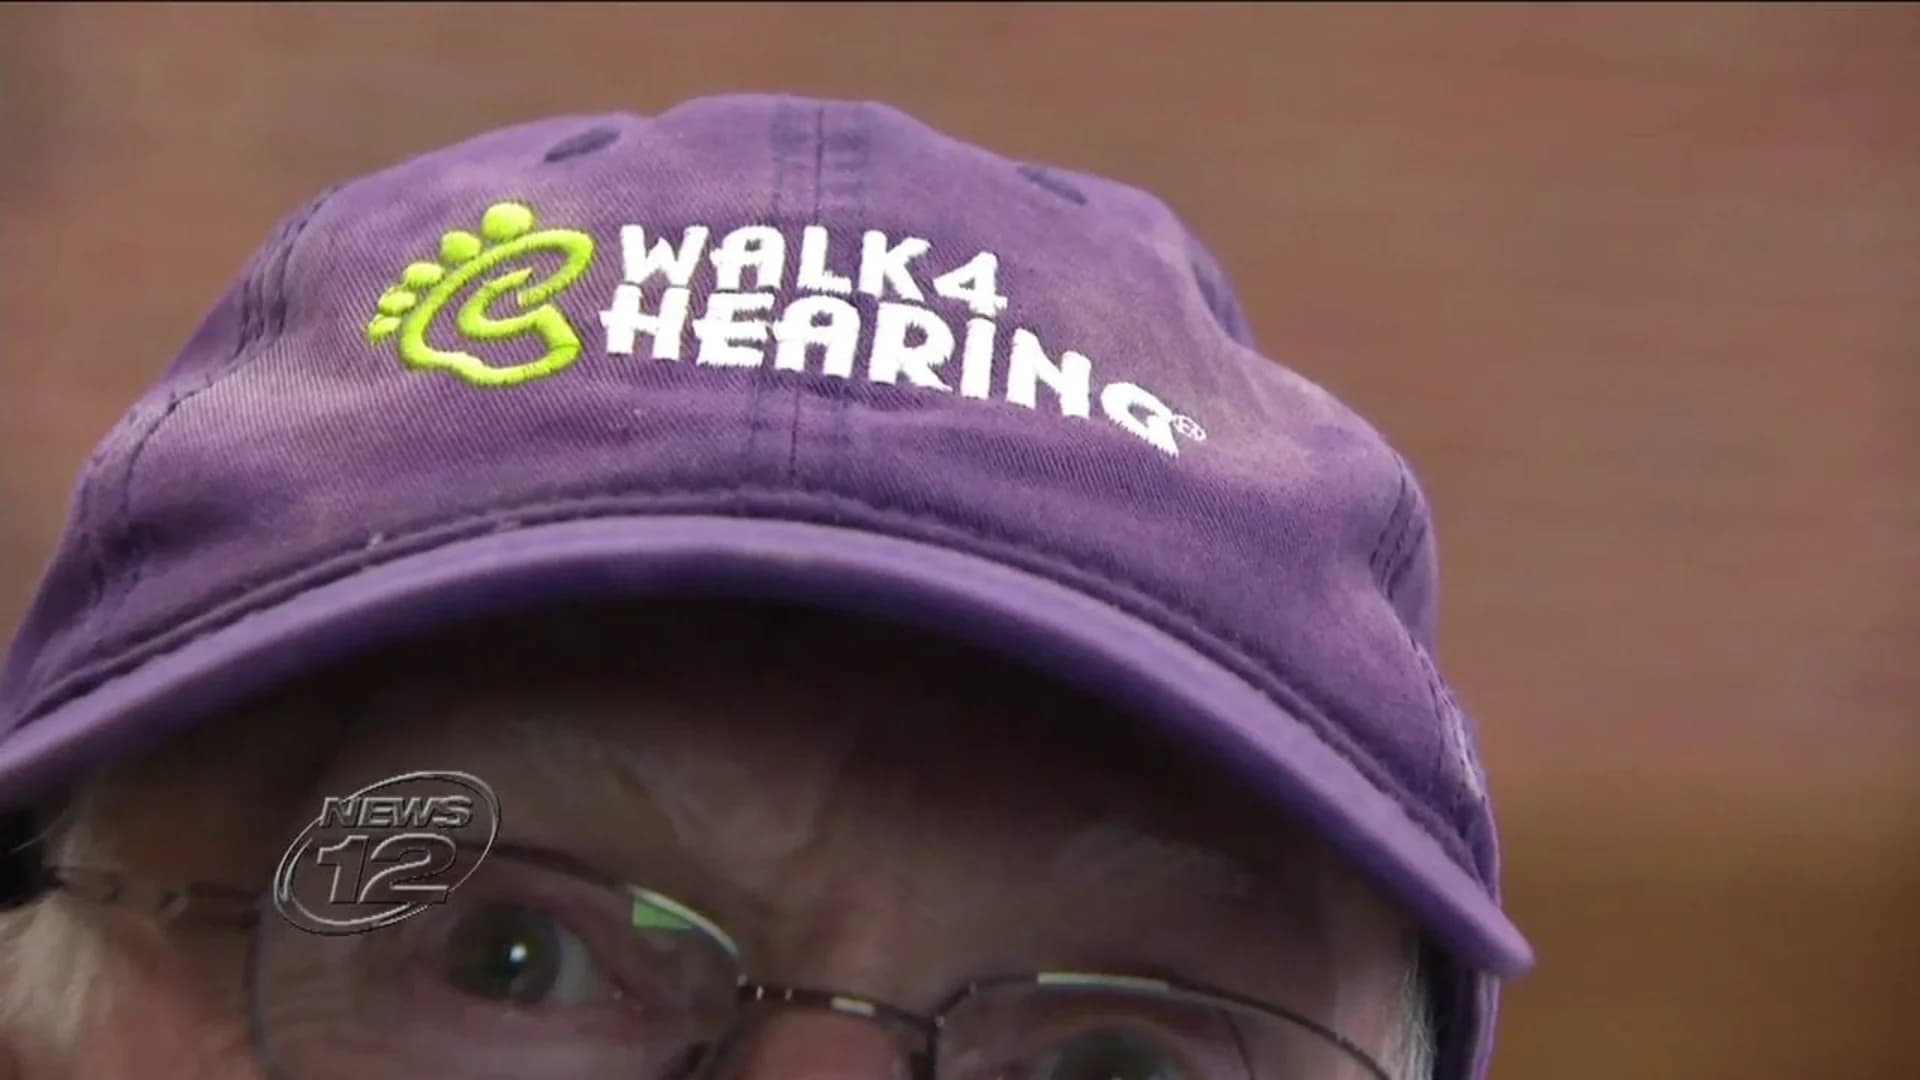 Community gets ready to “Walk4Hearing”